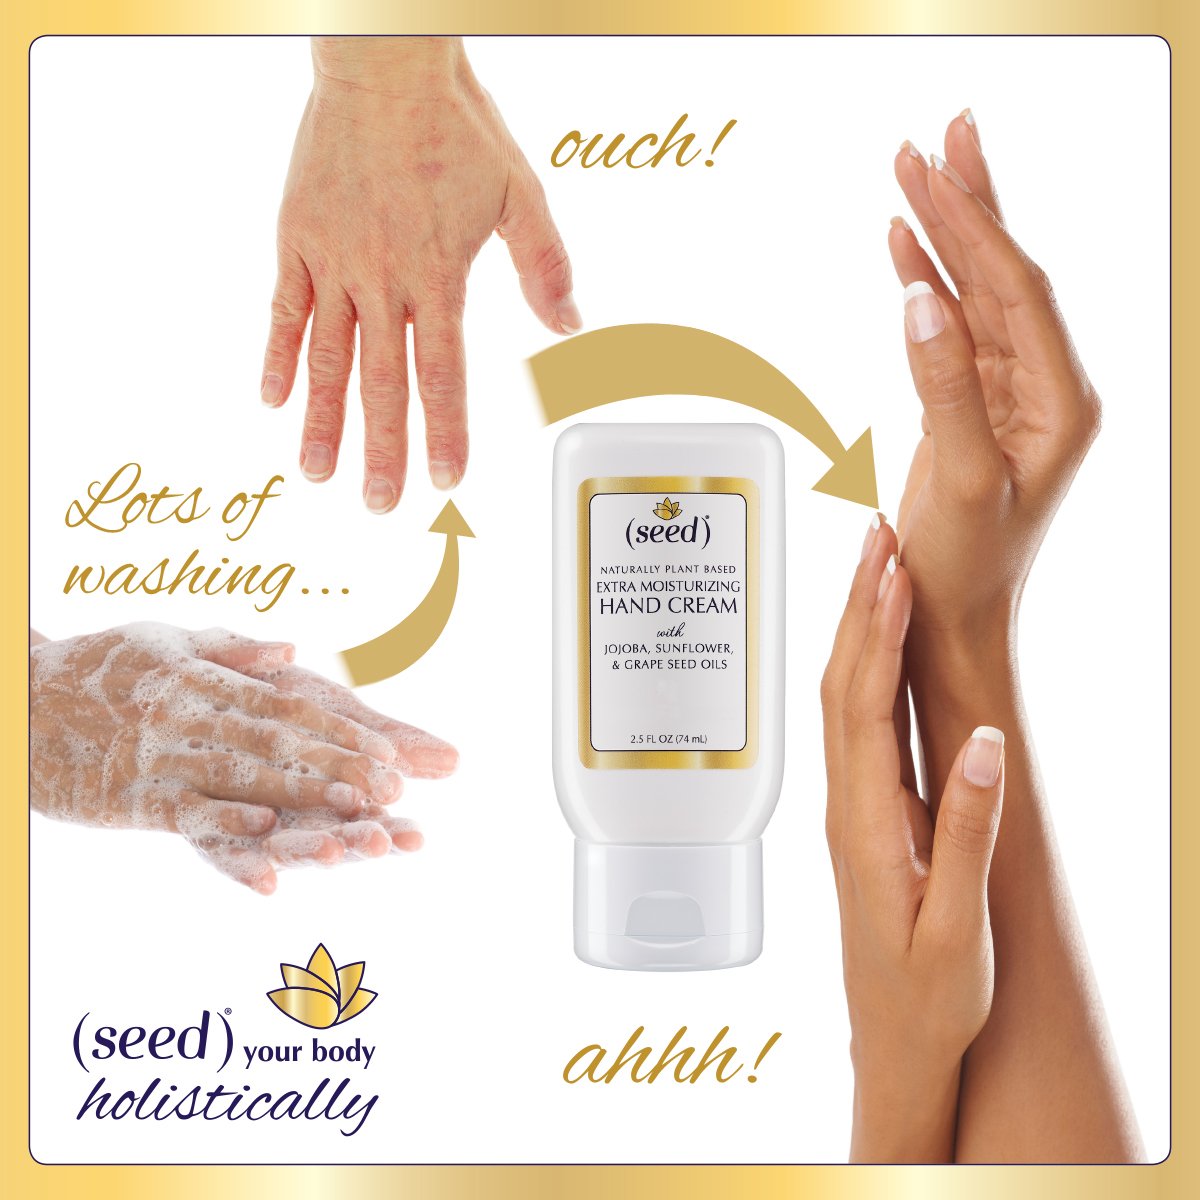 Seed Hand Cream soothes and softens frequently washed hands